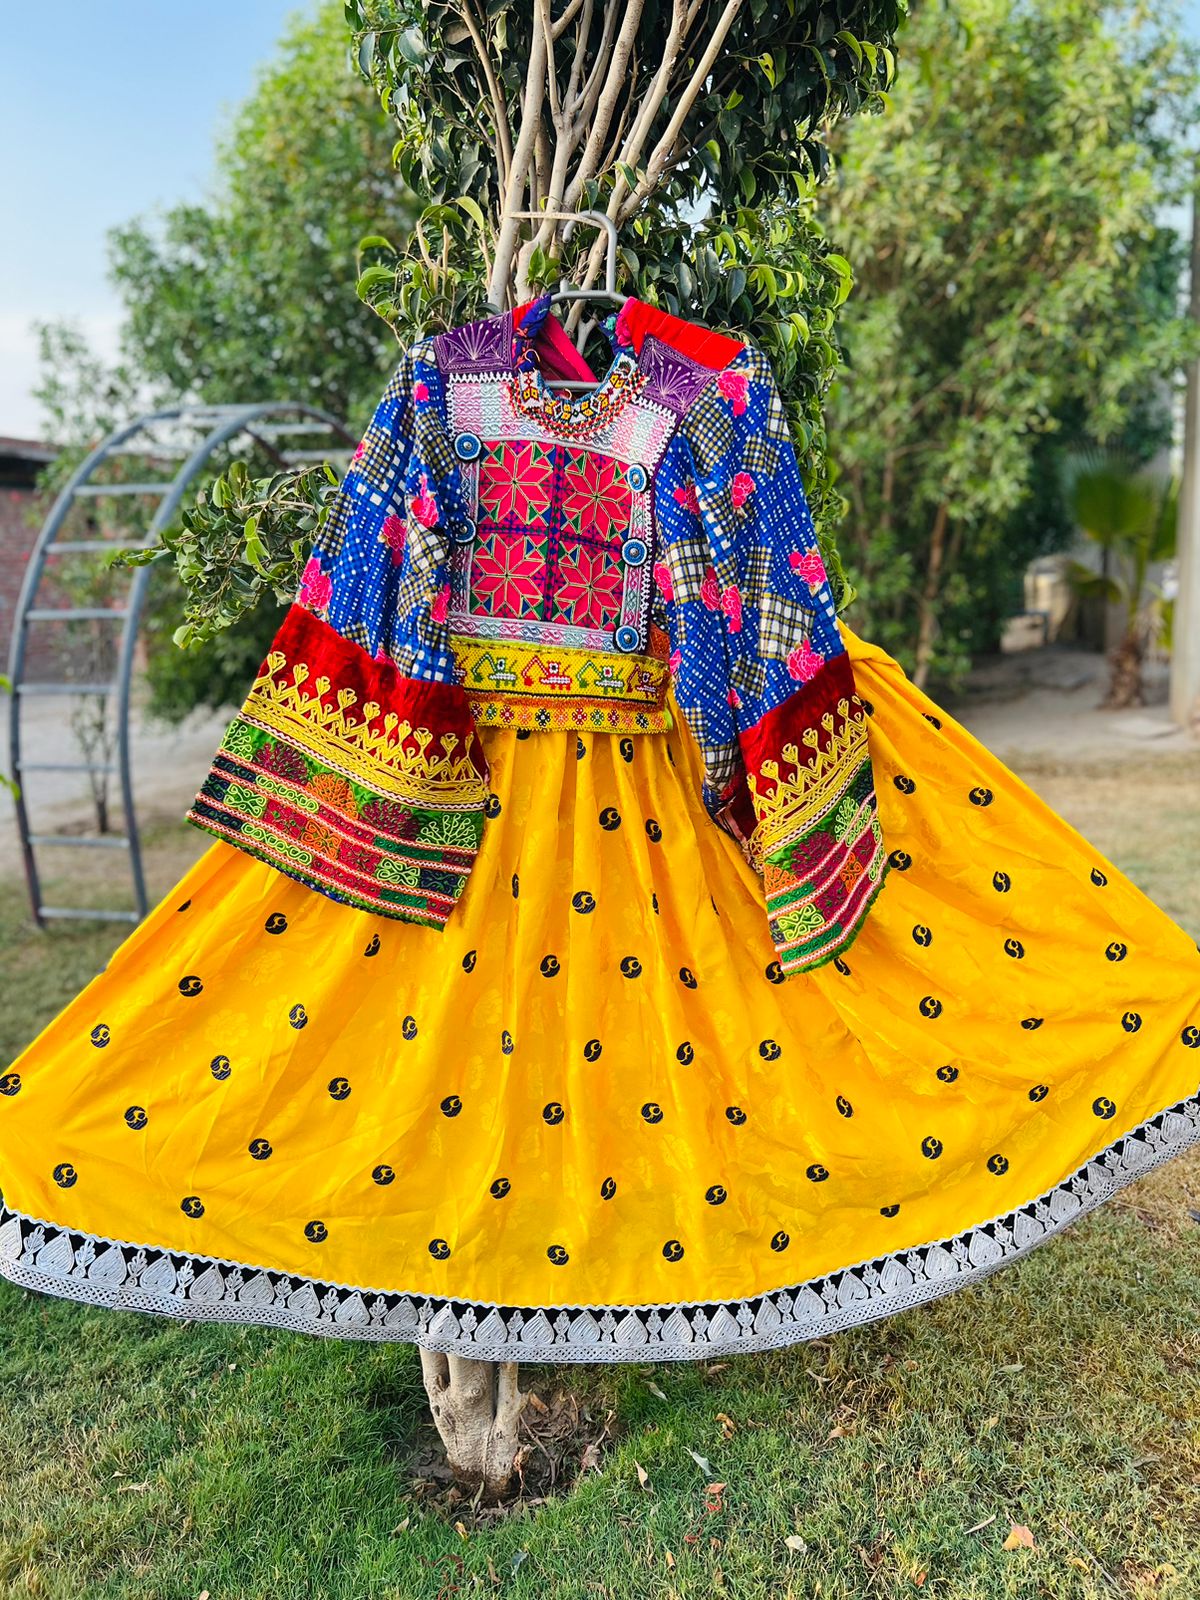 Afghani Ethnic Long Skirt Shirt With Handmade Embroidery Necklines And Sleeves